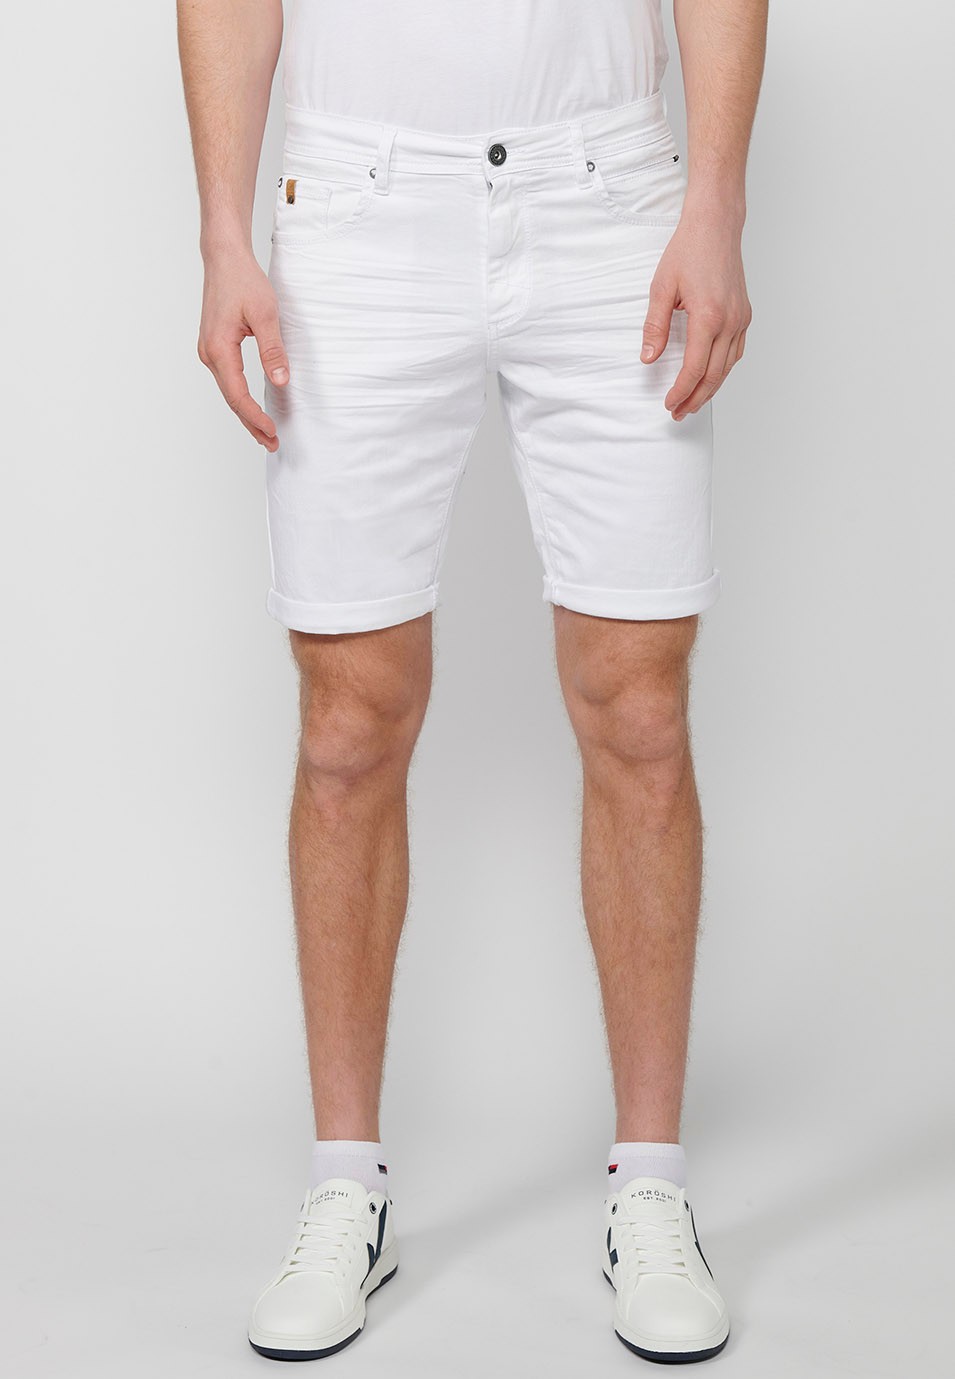 Denim Bermuda shorts with cuffed finish and front zipper and button closure. Five pockets, one match pocket, White for Men 4